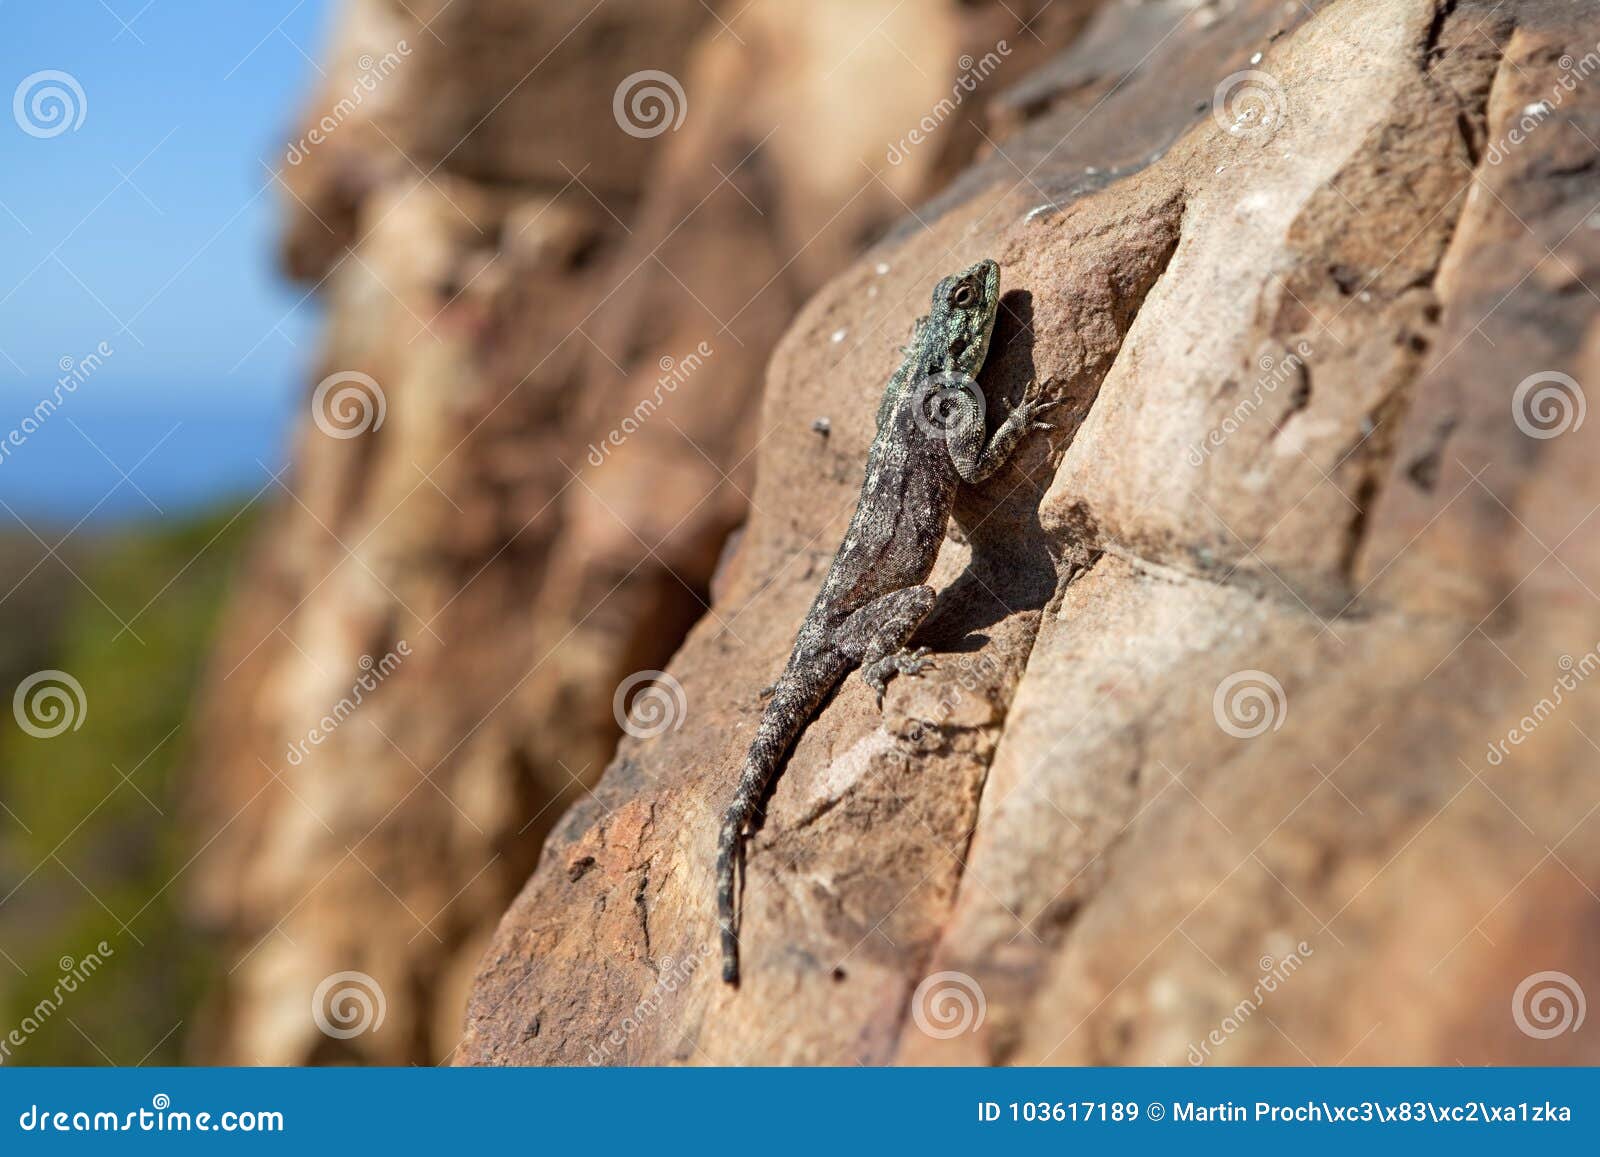 Agama, South Africa stock image. Image of natural, animal - 103617189